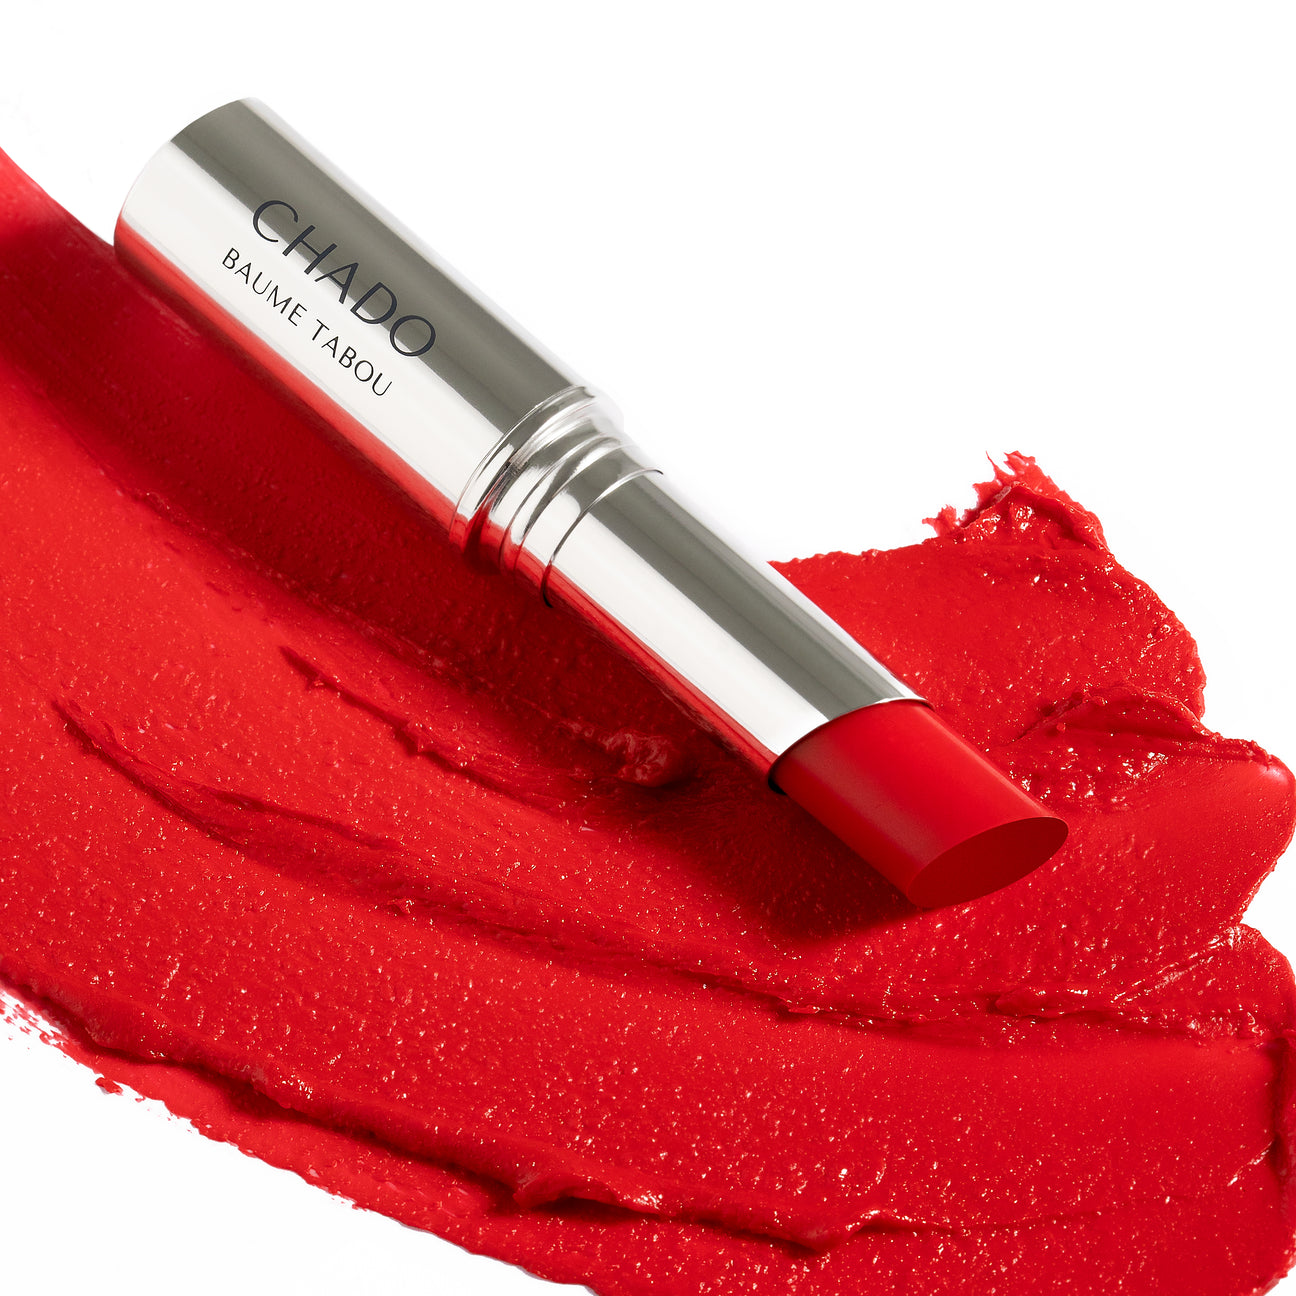 Baume Tabou Tinted Lip Balm, Red